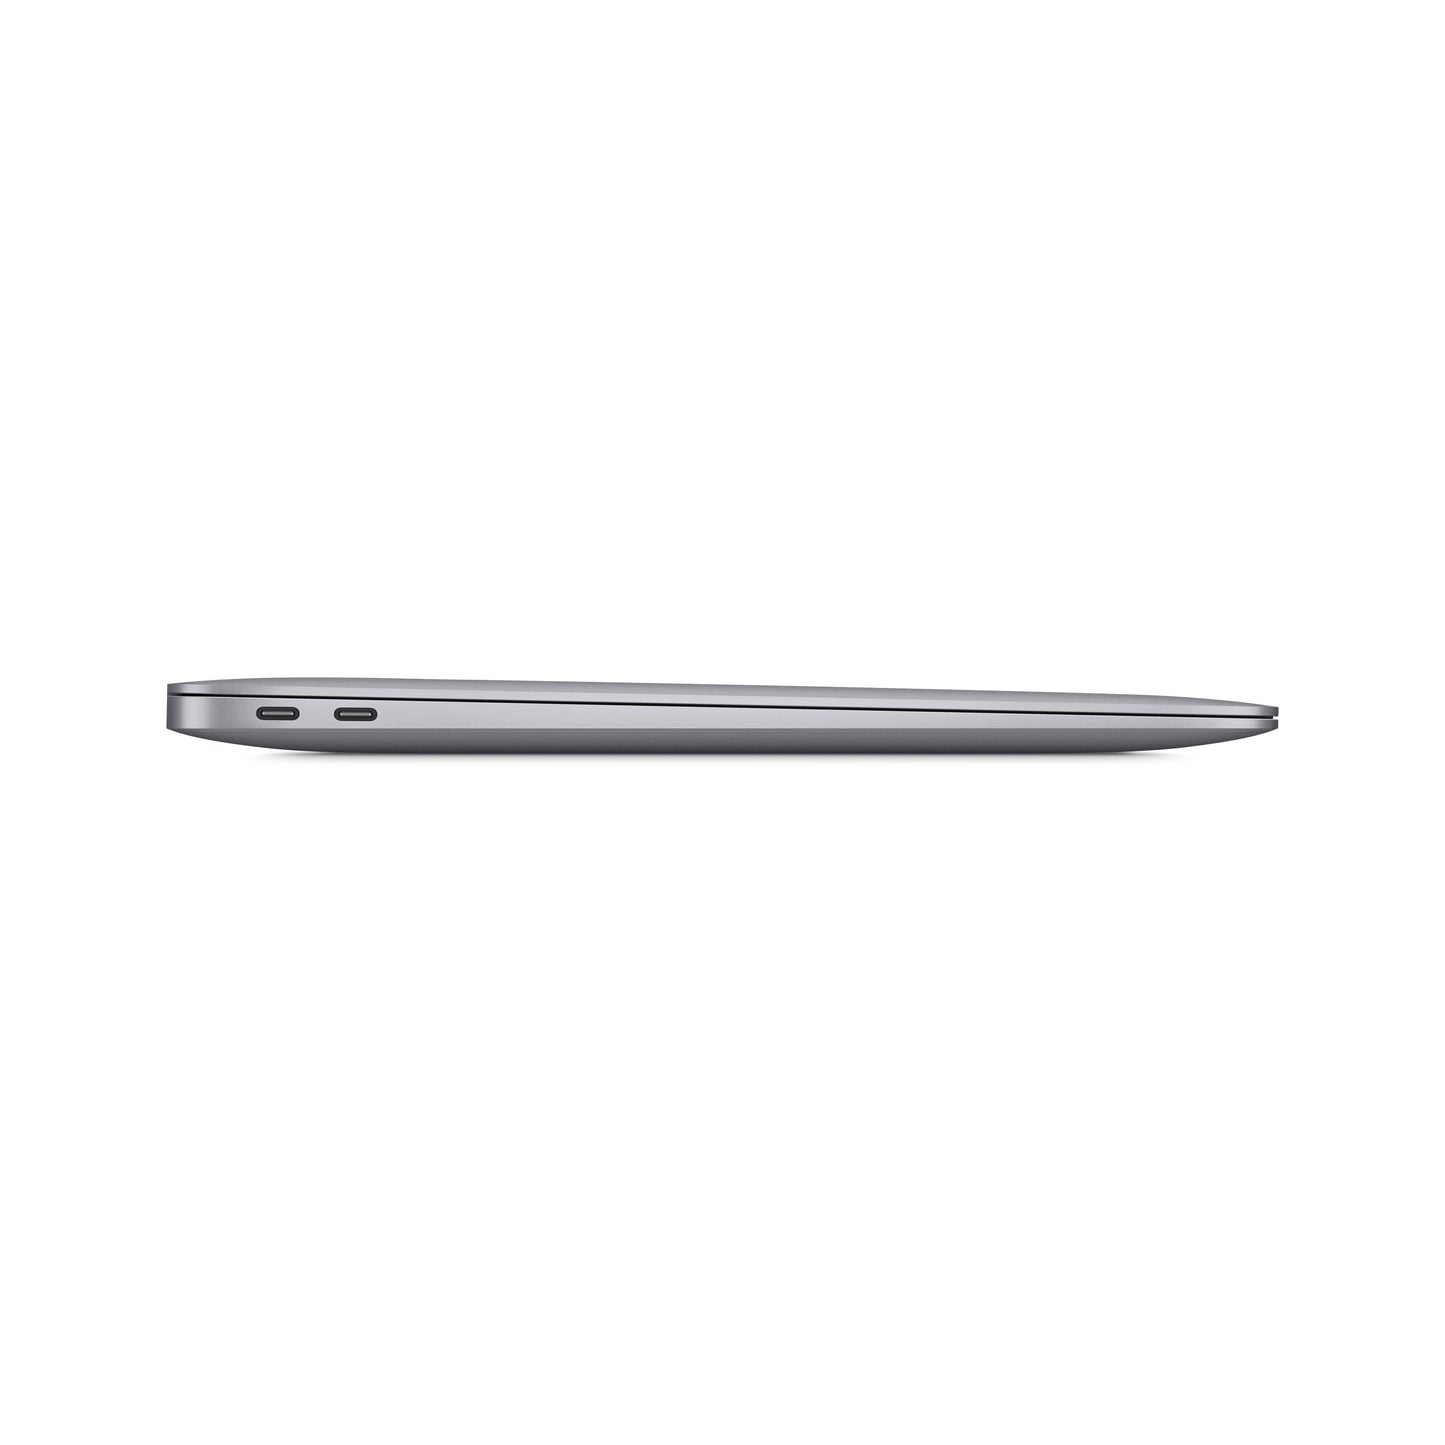 13-inch MacBook Air: Apple M1 chip with 8-core CPU and 7-core GPU, 256GB - Space Grey - US English Keyboard